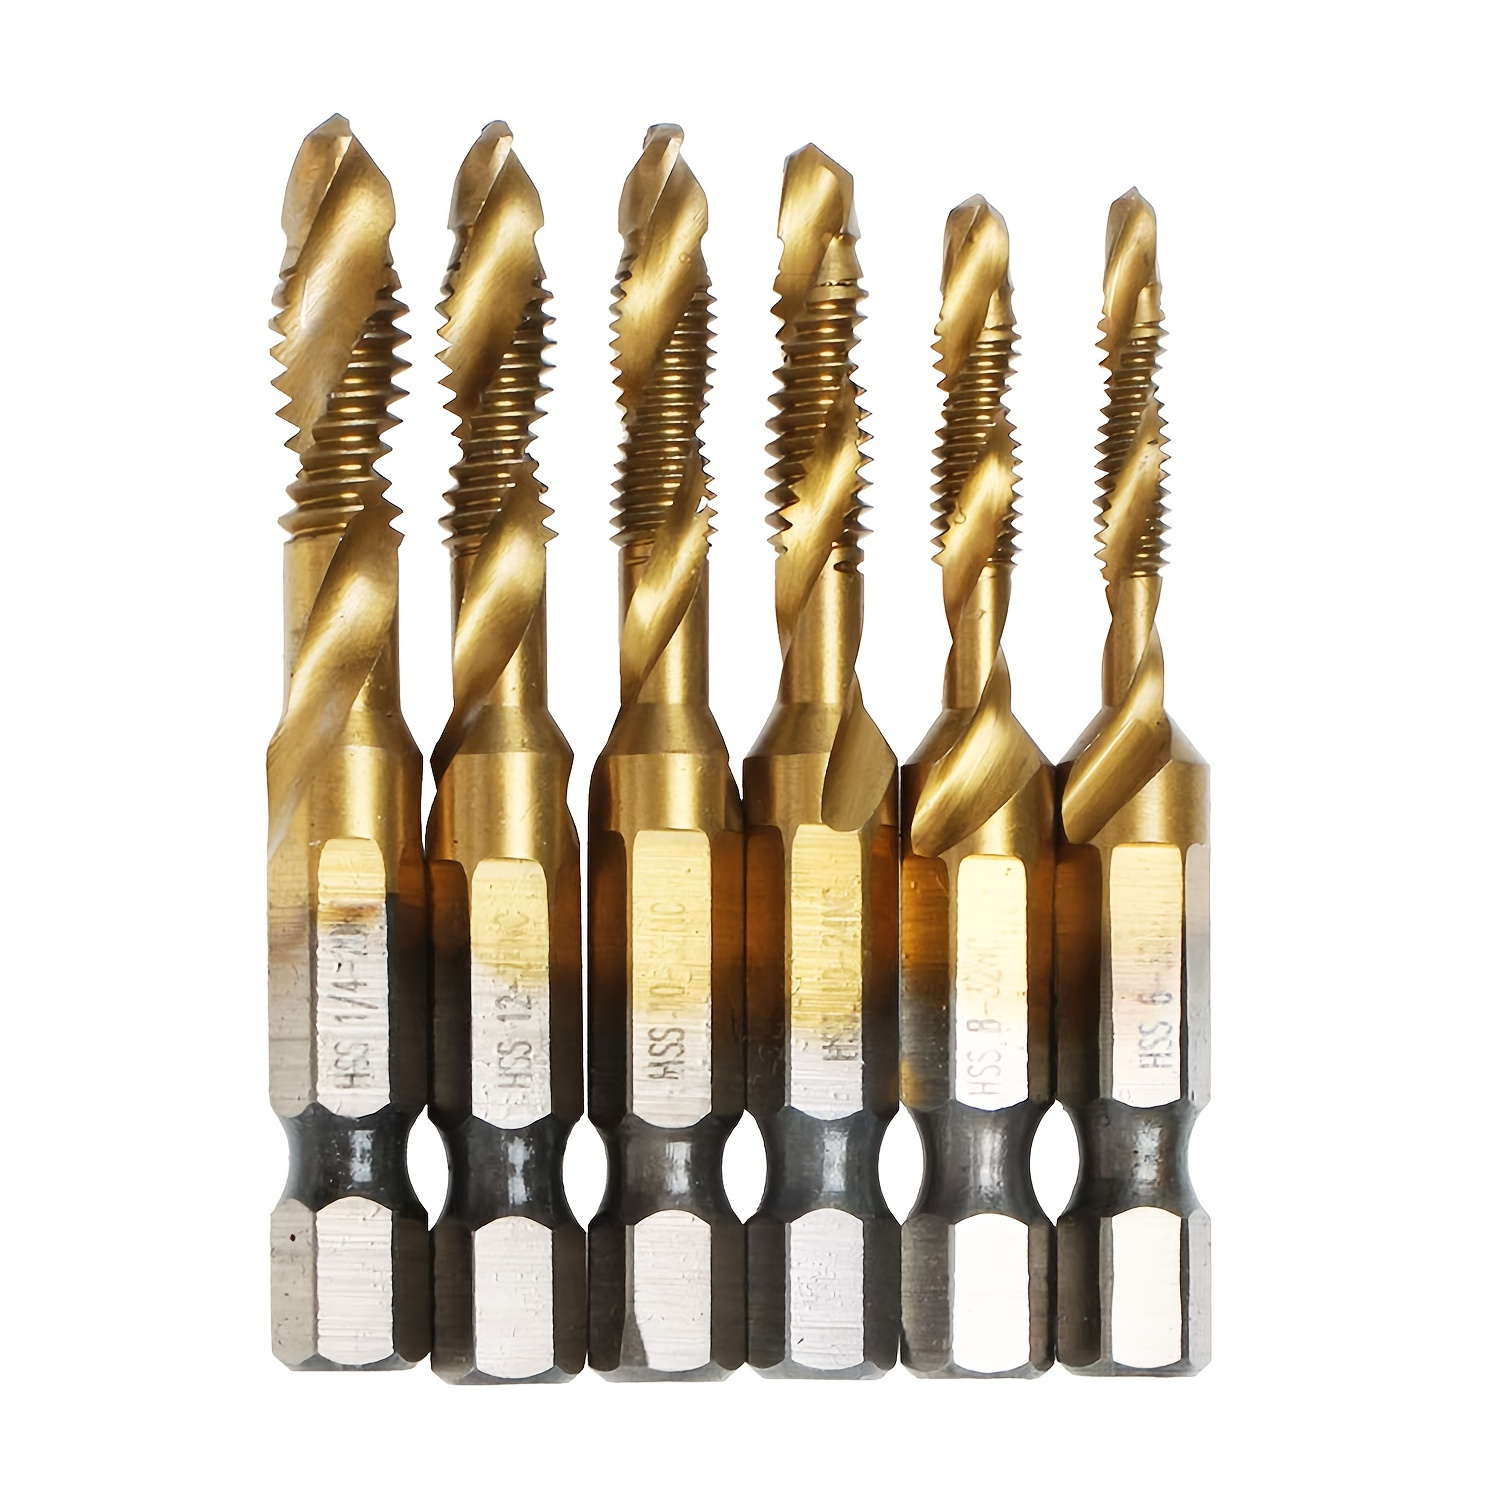 

6pcs Titanium Combination Drill And Tap Bits Set, Sae 6-32nc 8-32nc 10-24nc 10-32nc 12-24nc 1/4-20nc Screw Taps, 3-in-1 Bit Tool For Drilling, Tapping And Countersinking